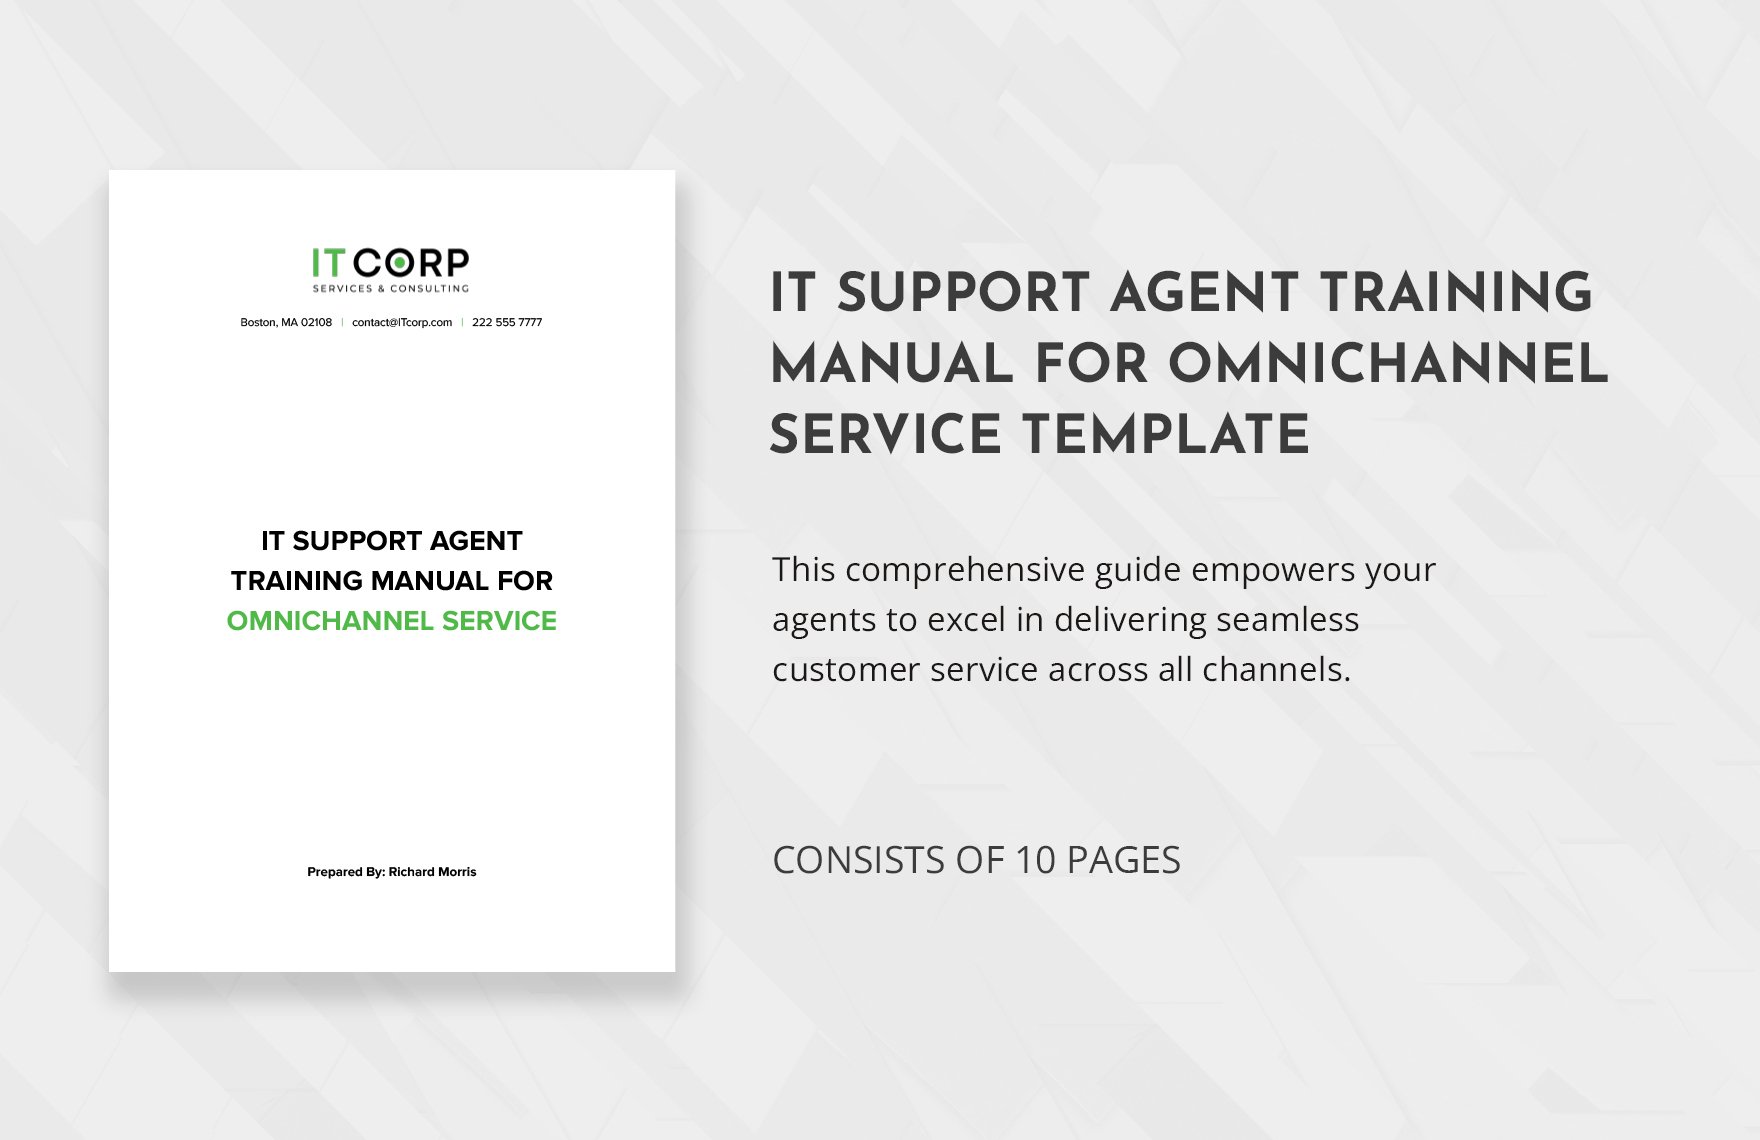 IT Support Agent Training Manual for Omnichannel Service Template